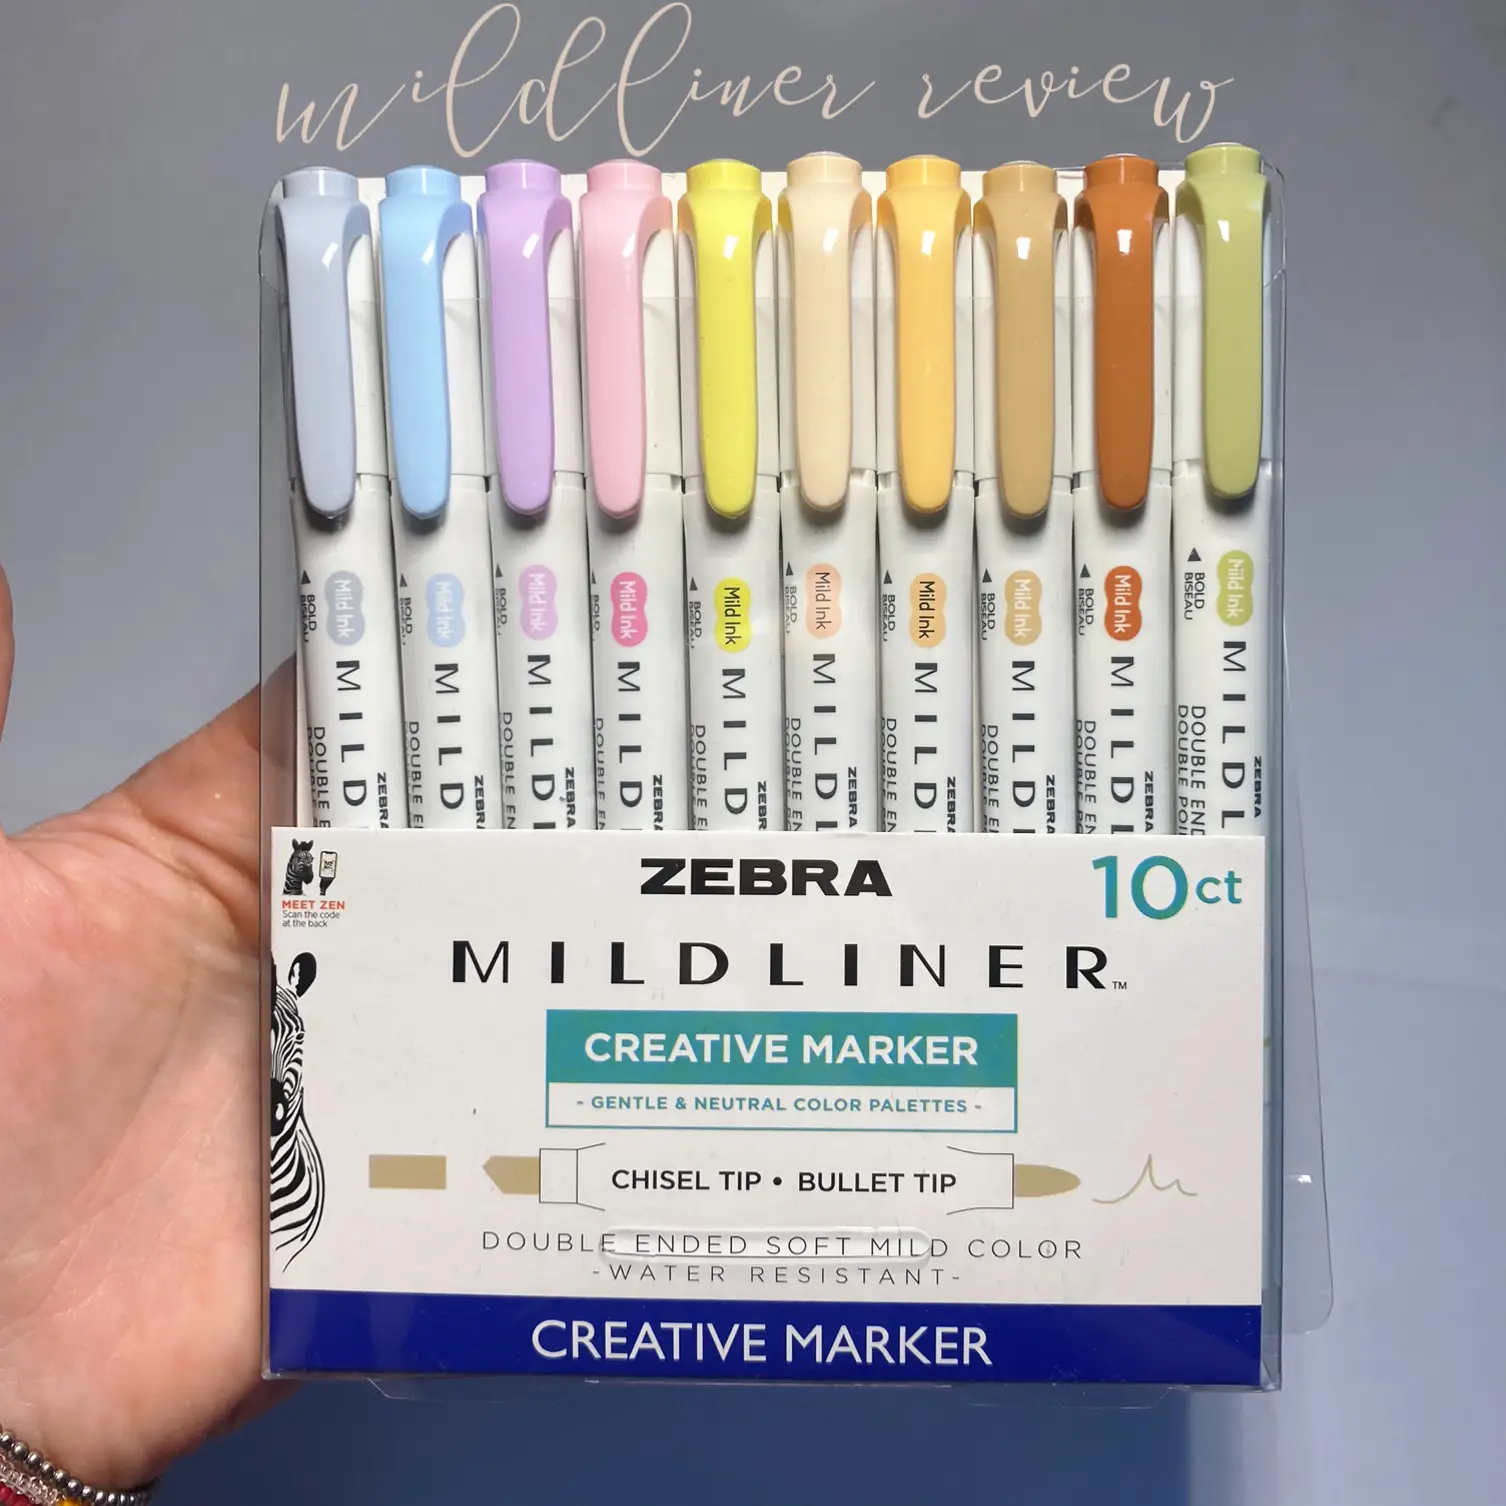 mildliner review/swatch test 🖊️, Gallery posted by Tatum Hale